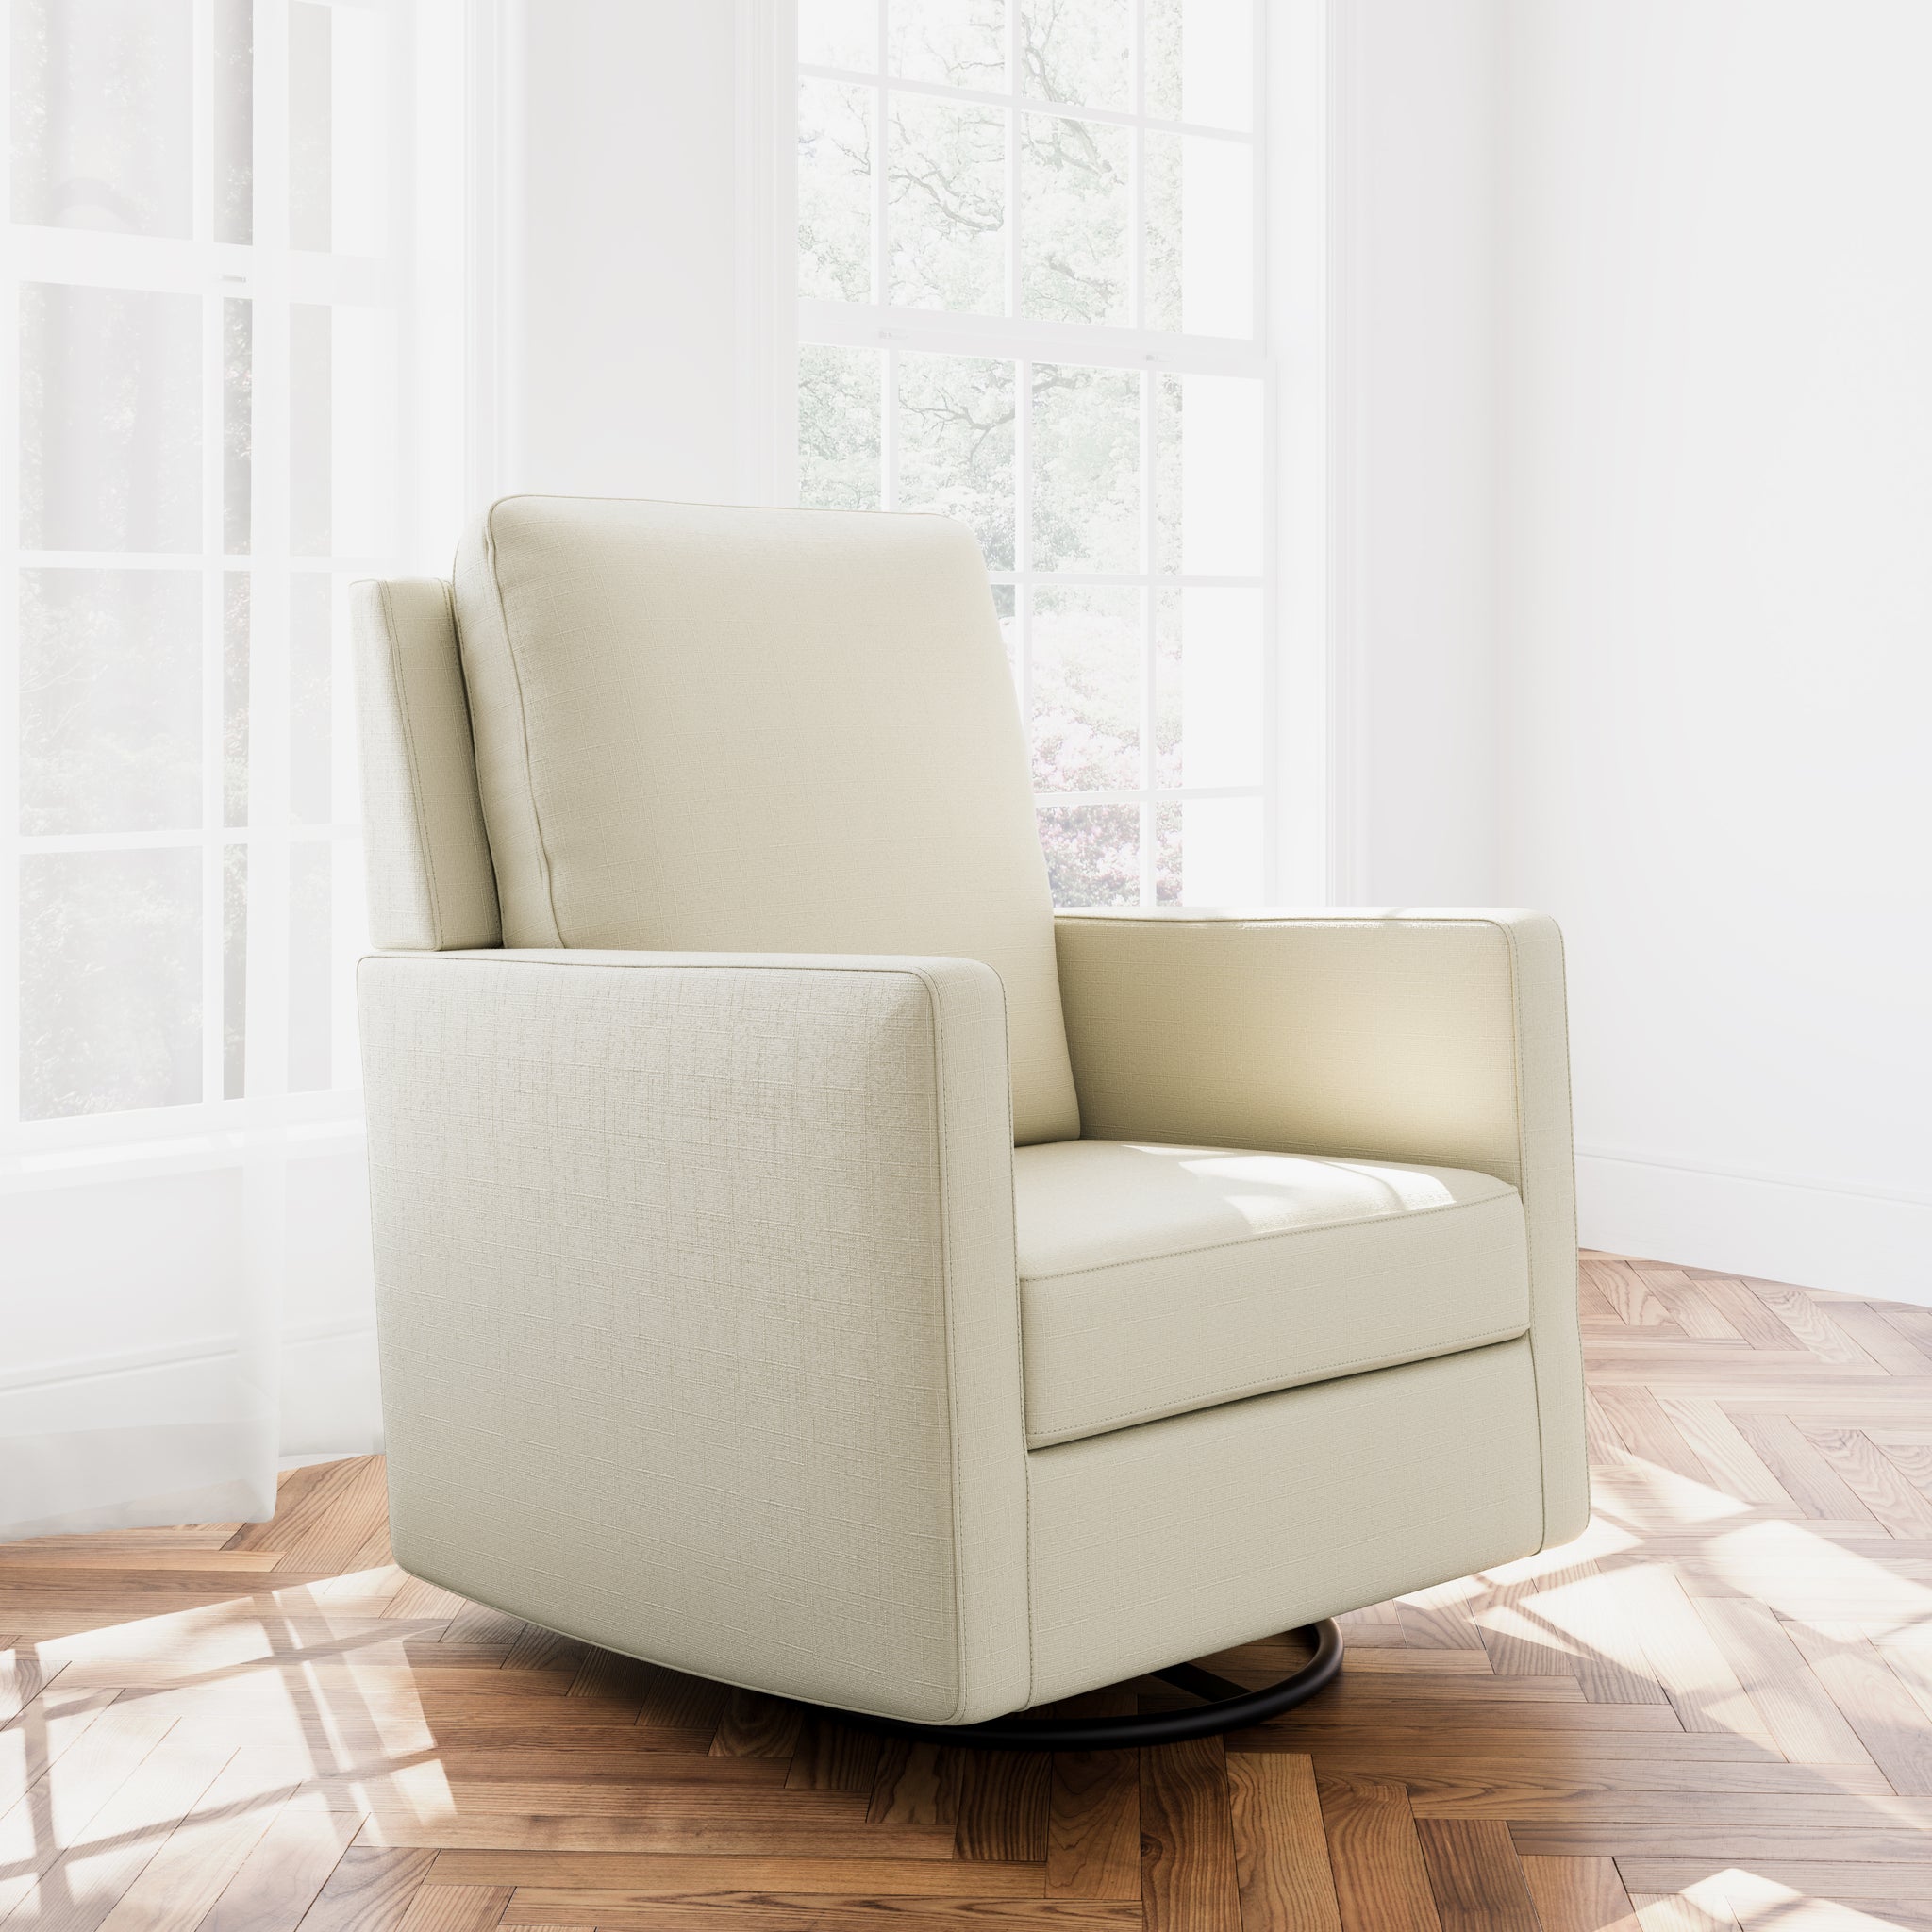 Swivel glider with pearl fabric in a room